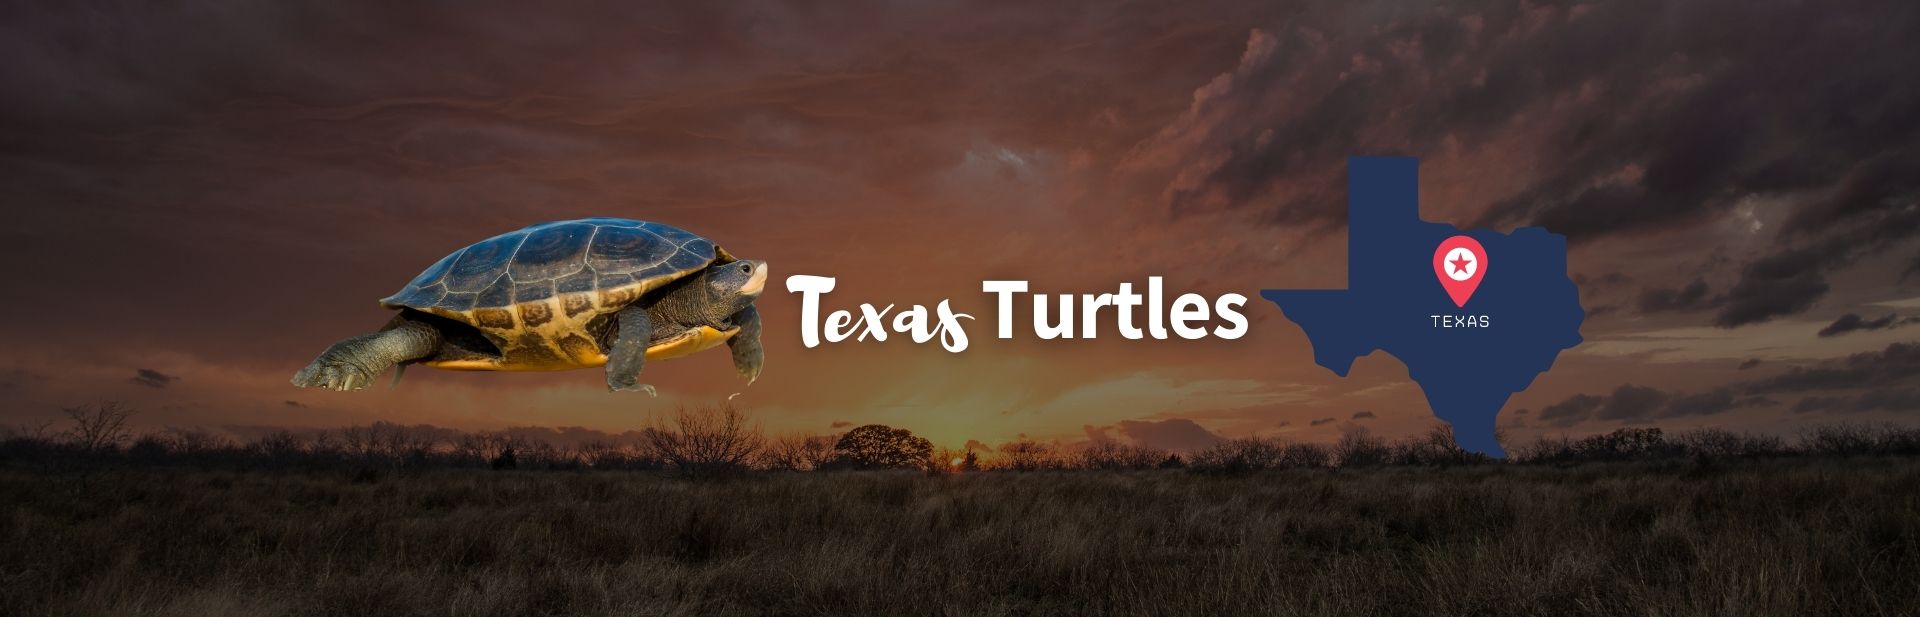 All The 26 Types of Texas Turtles (ID Guide and Photos)